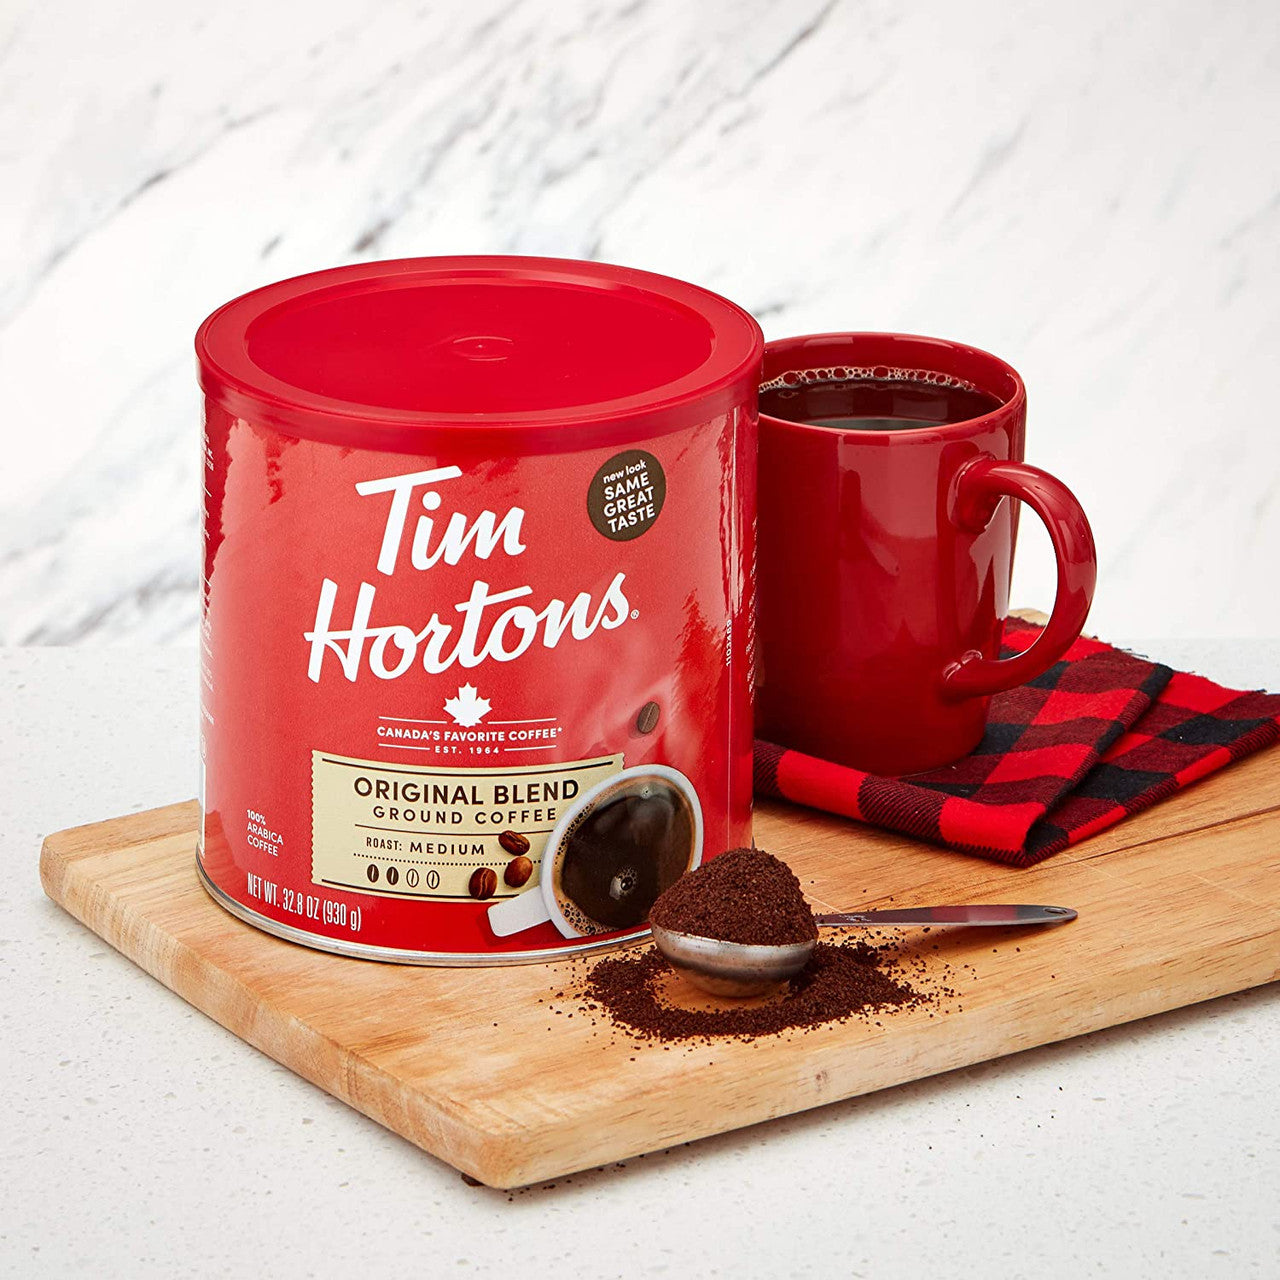 Tim Hortons Original Coffee, Fine Grind Coffee Can, Medium Roast, 930g/33 oz., (1 Pack Original Can) {Imported from Canada}